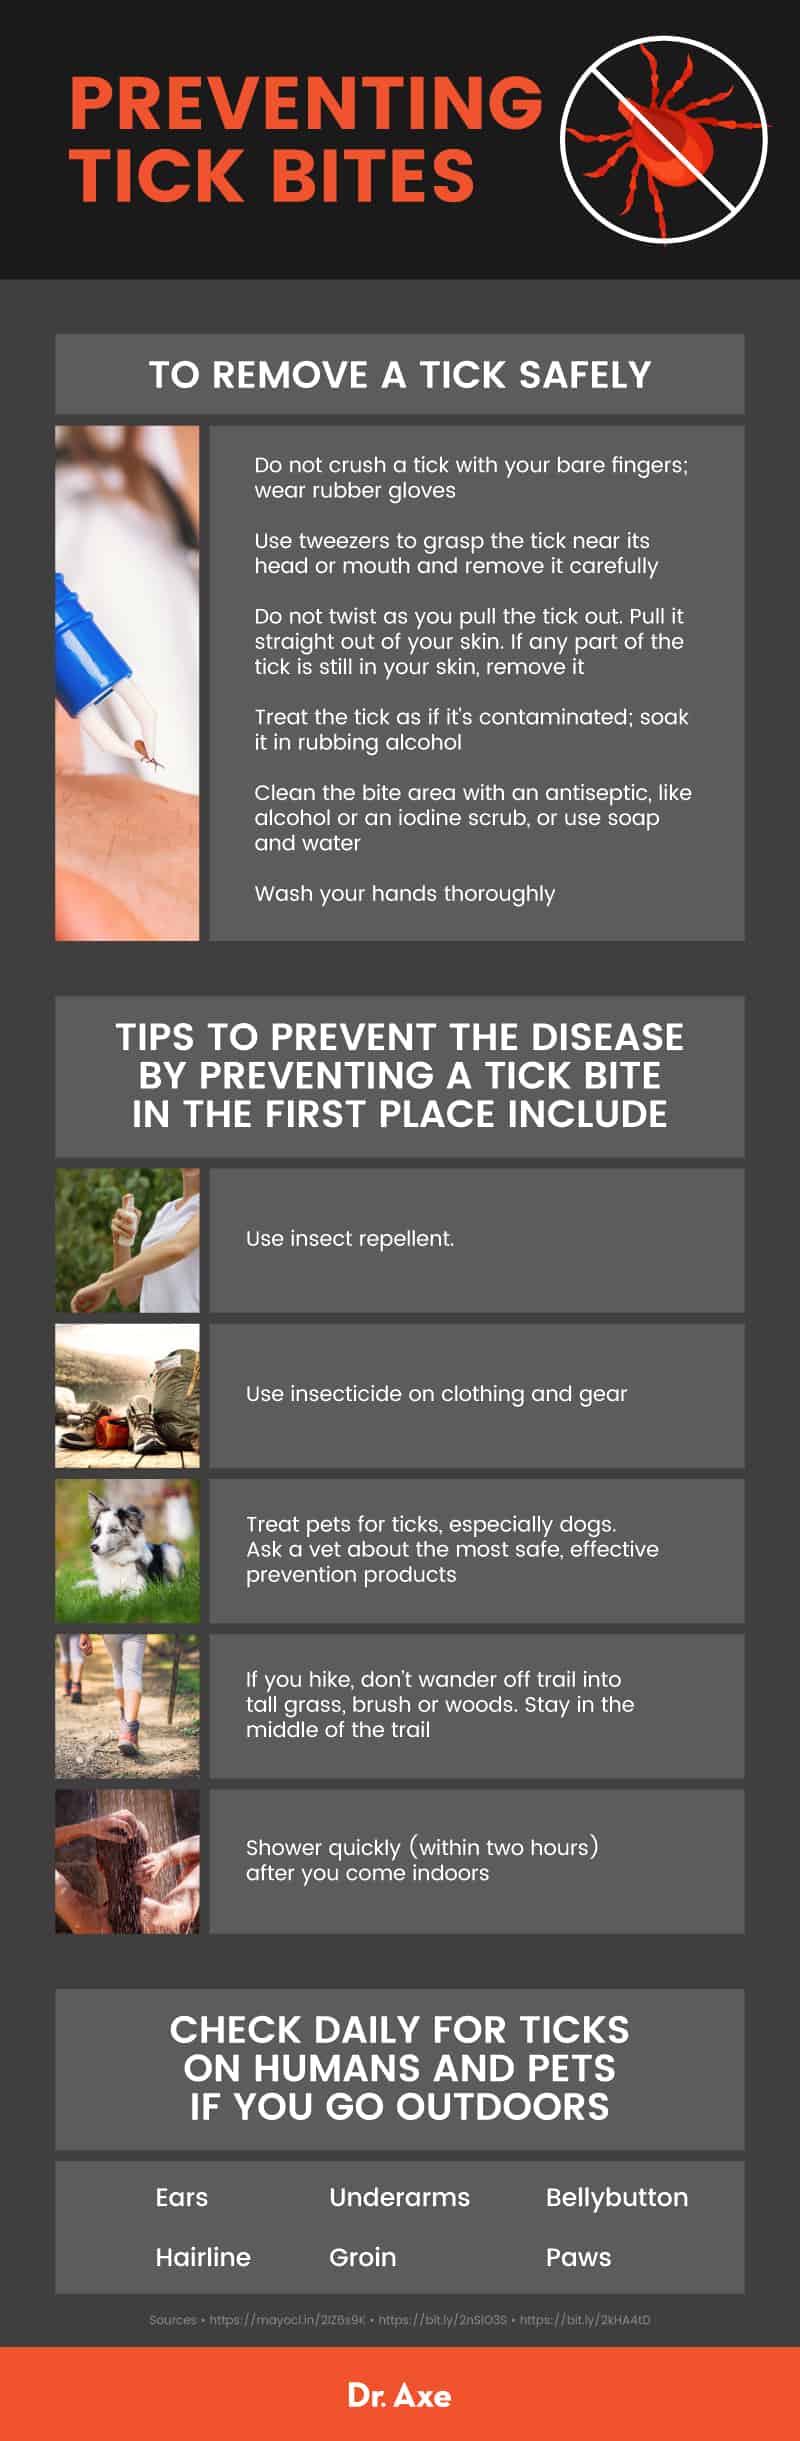 Rocky Mountain spotted fever: tick removal - Dr. Axe